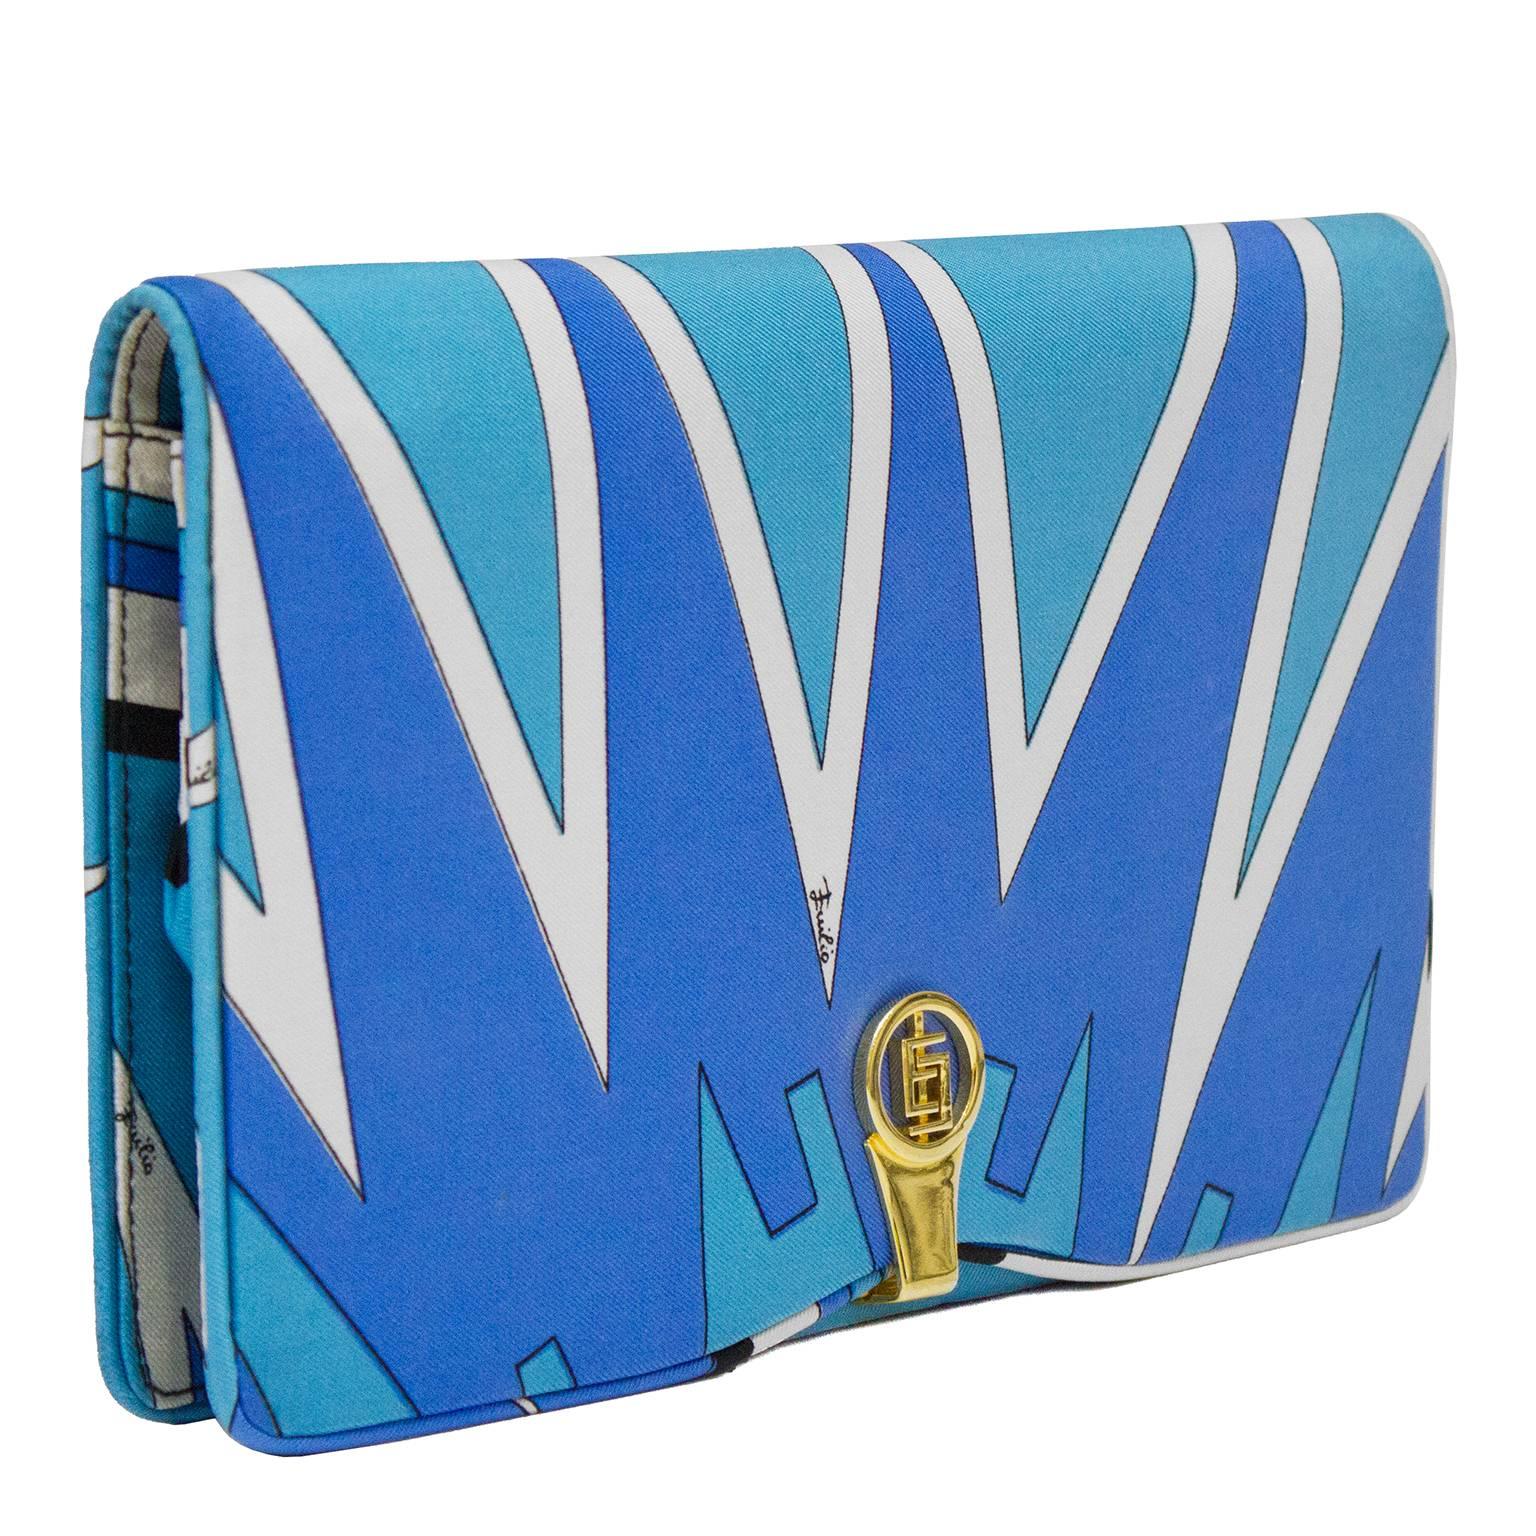 Beautiful 1970's Emilio Pucci silk clutch. Iconic Pucci brand printed and signed fabric in blue and white tones. Gold hardware with interlocking E's. Clean interior with gold stamp. The perfect touch of the 1960's to add to any look. Very good